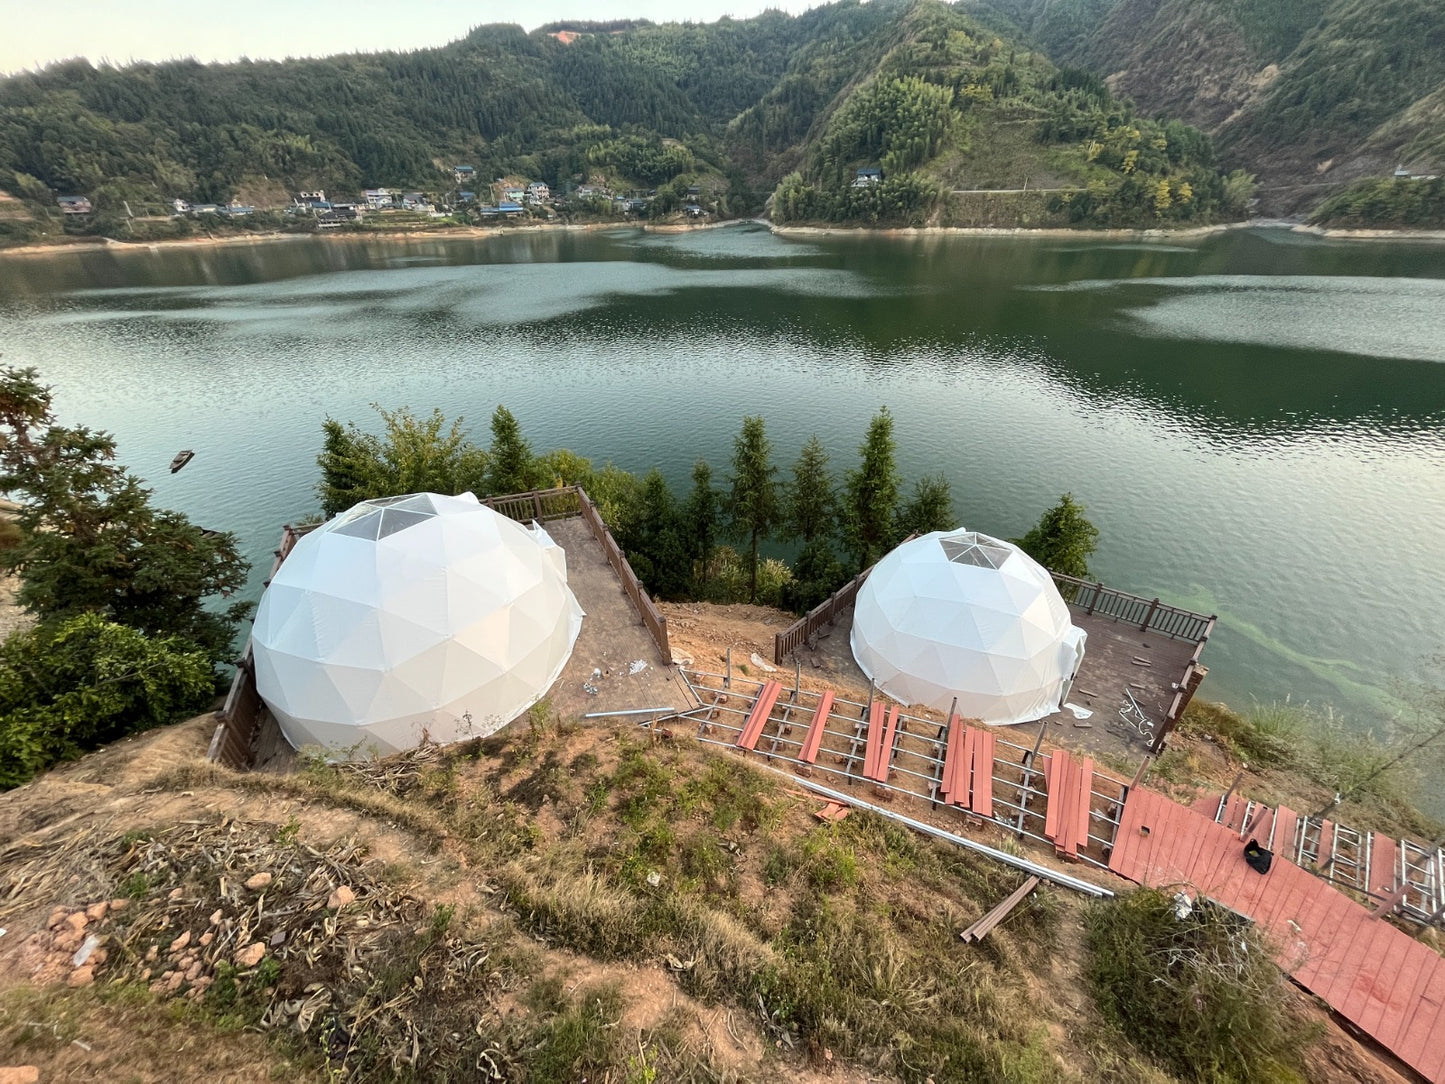 Premium Geodesic Dome Outdoor Glamping